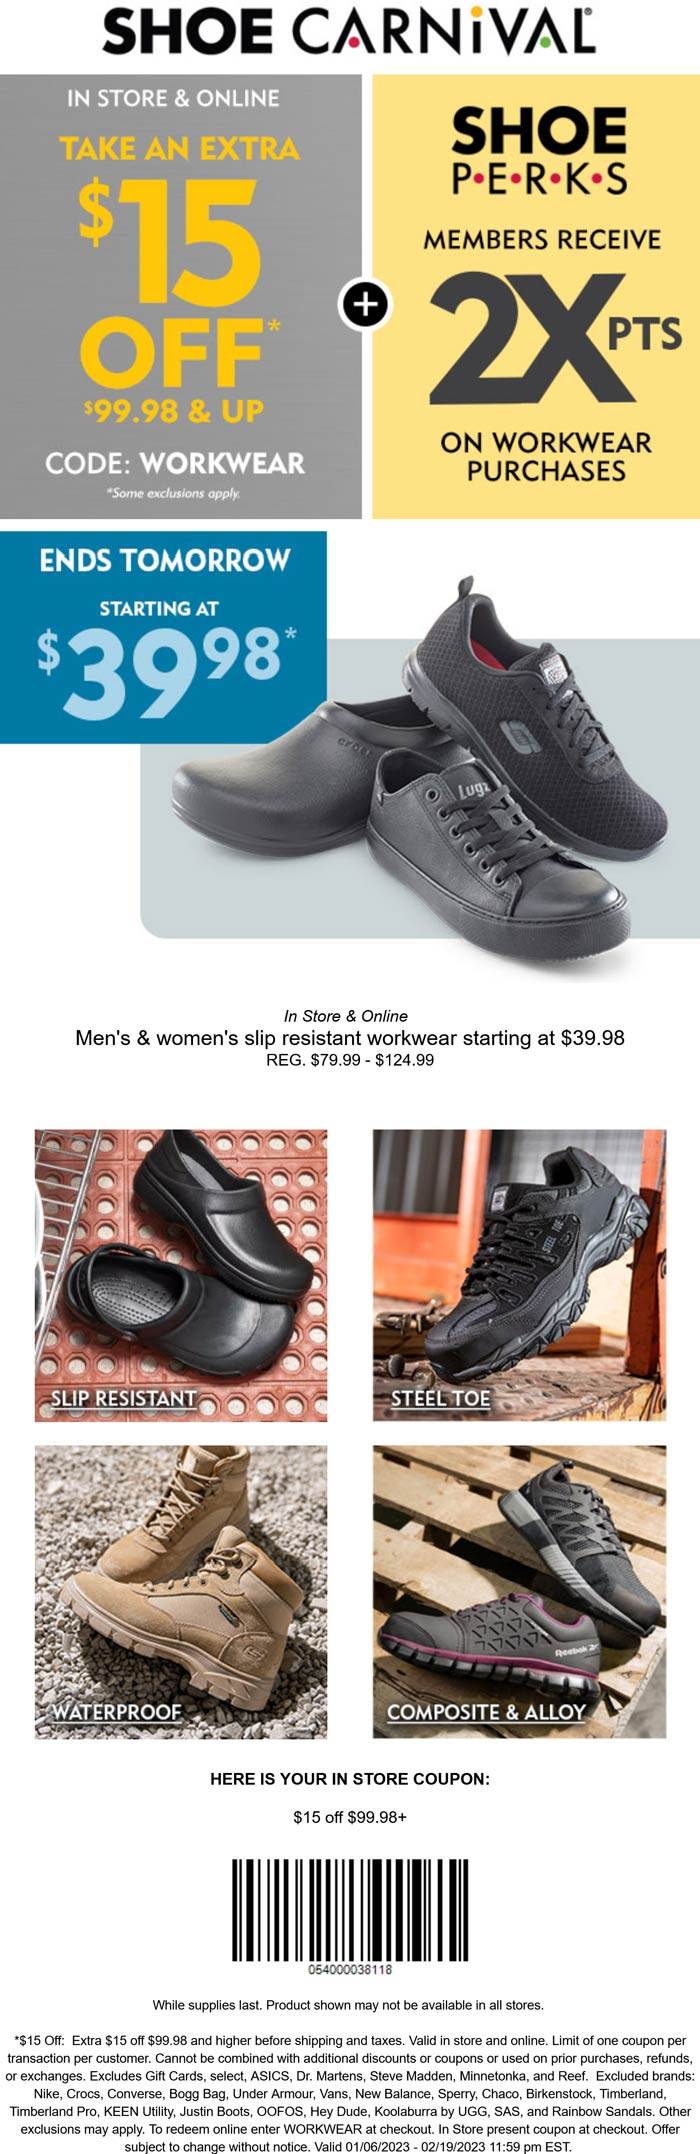 Shoe Carnival stores Coupon  $15 off $100 on work footwear at Shoe Carnival, or online via promo code WORKWEAR #shoecarnival 